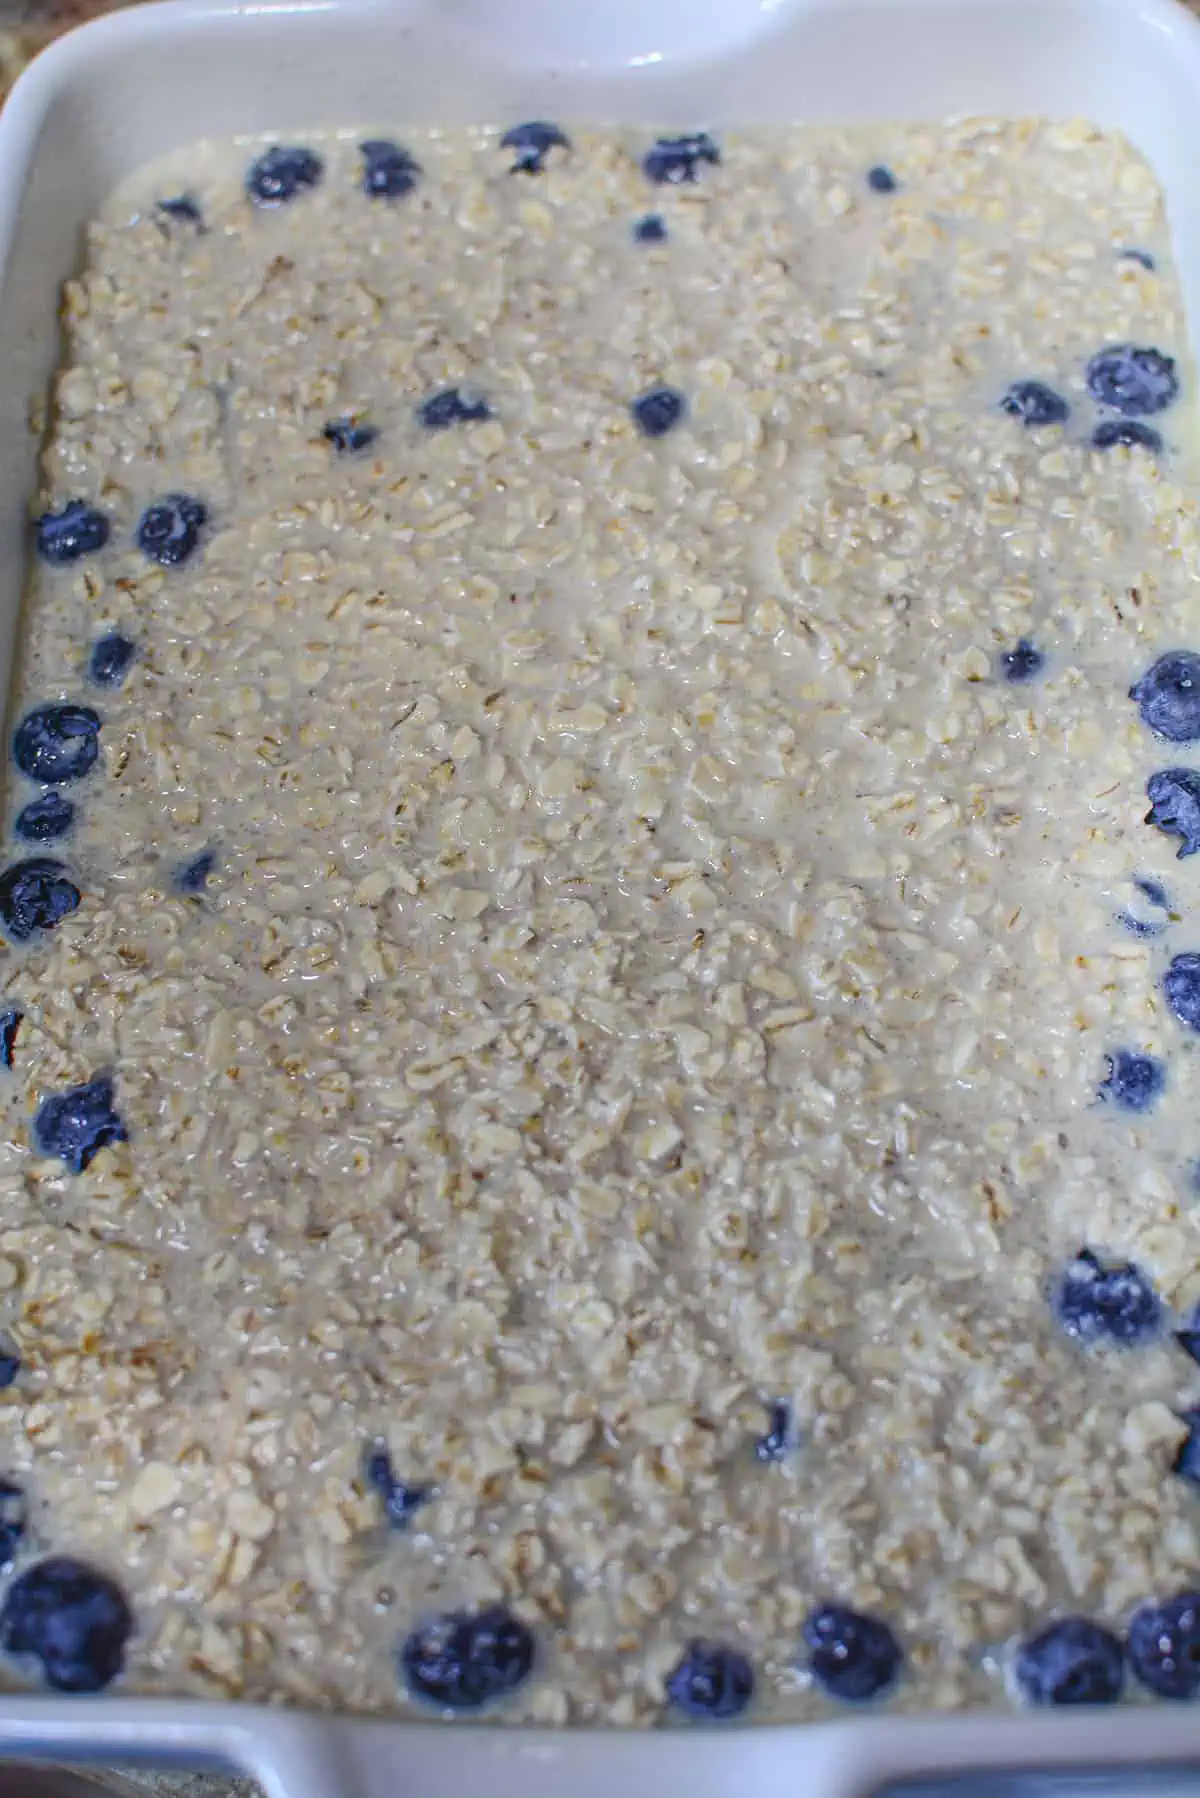 The rest of the oatmeal batter on top of the blueberries. 